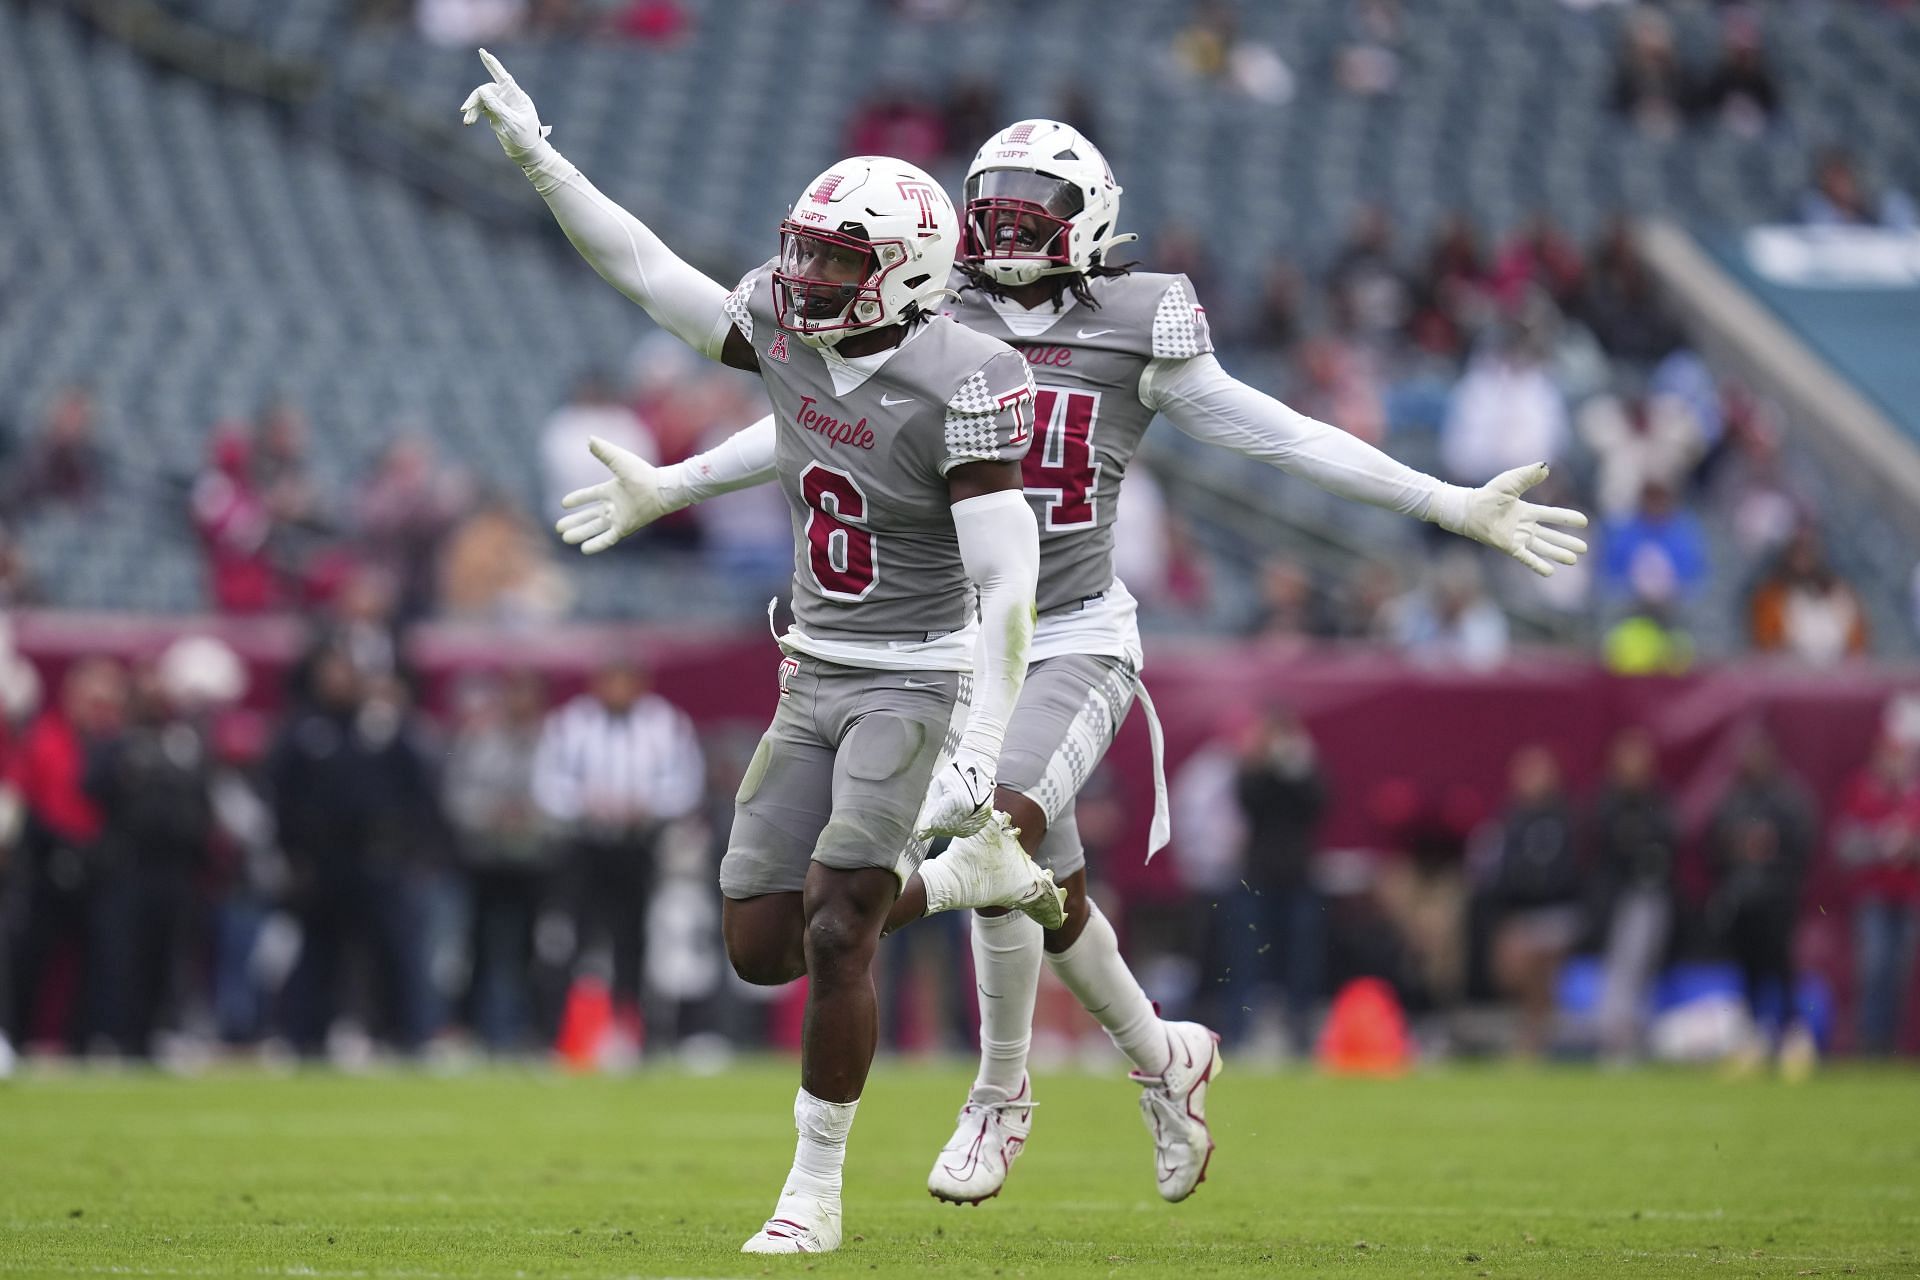 Jordan Magee #6 and Diwun Black #34 of the Temple Owls celebrate after a sack by Magee against the Navy Midshipmen